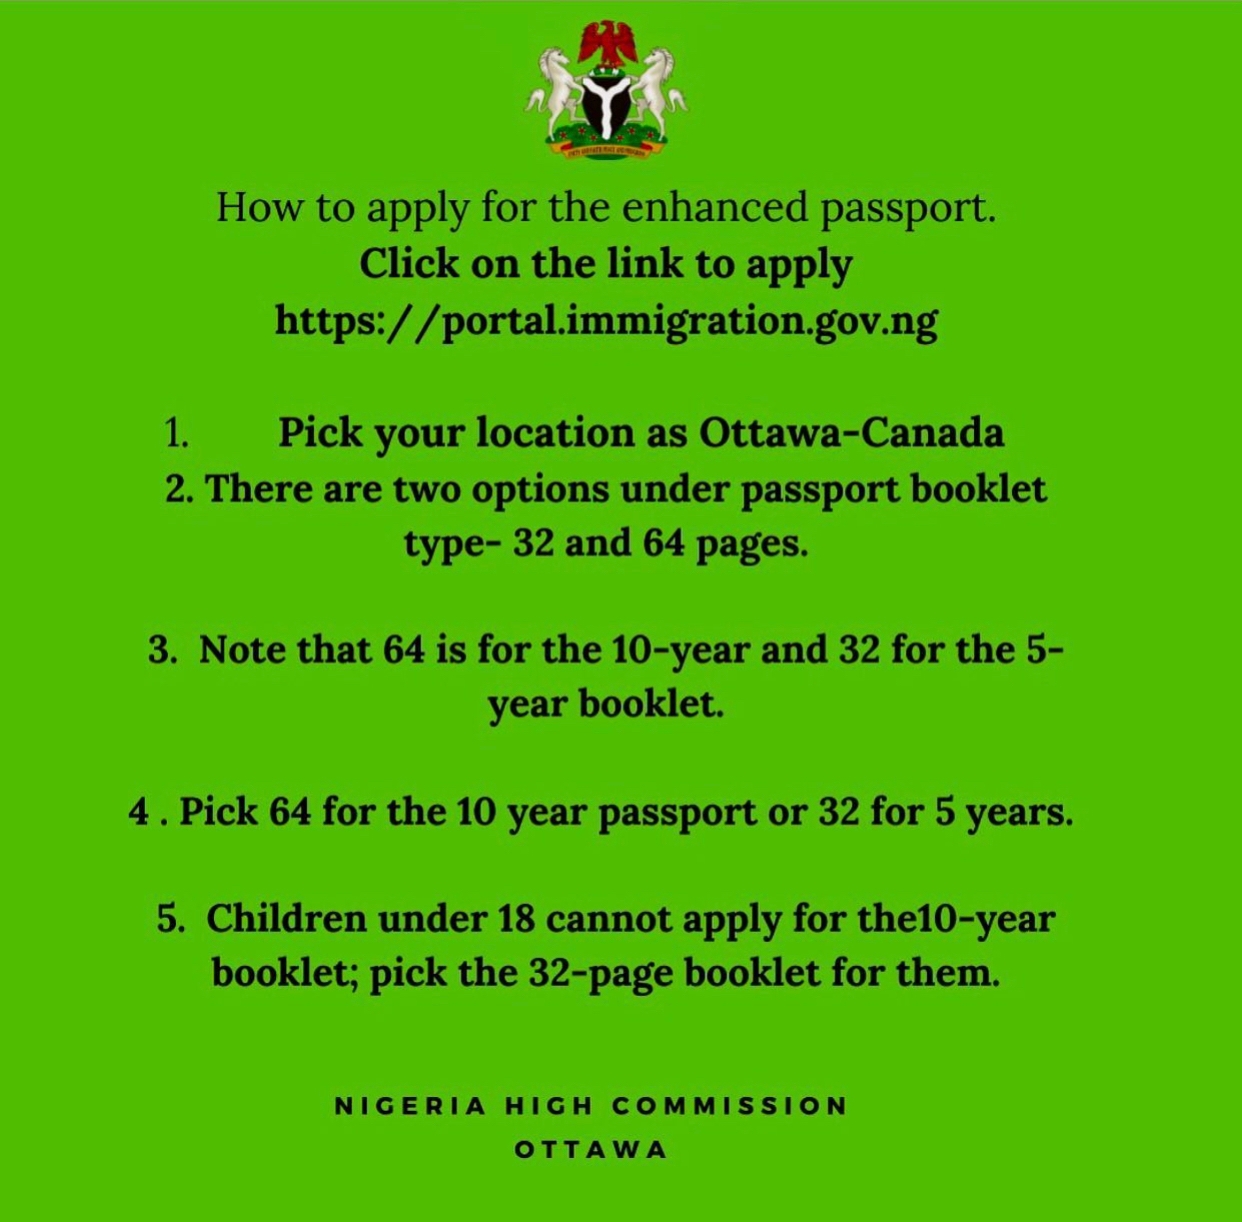 HOW TO APPLY FOR THE ENHANCED PASSPORT